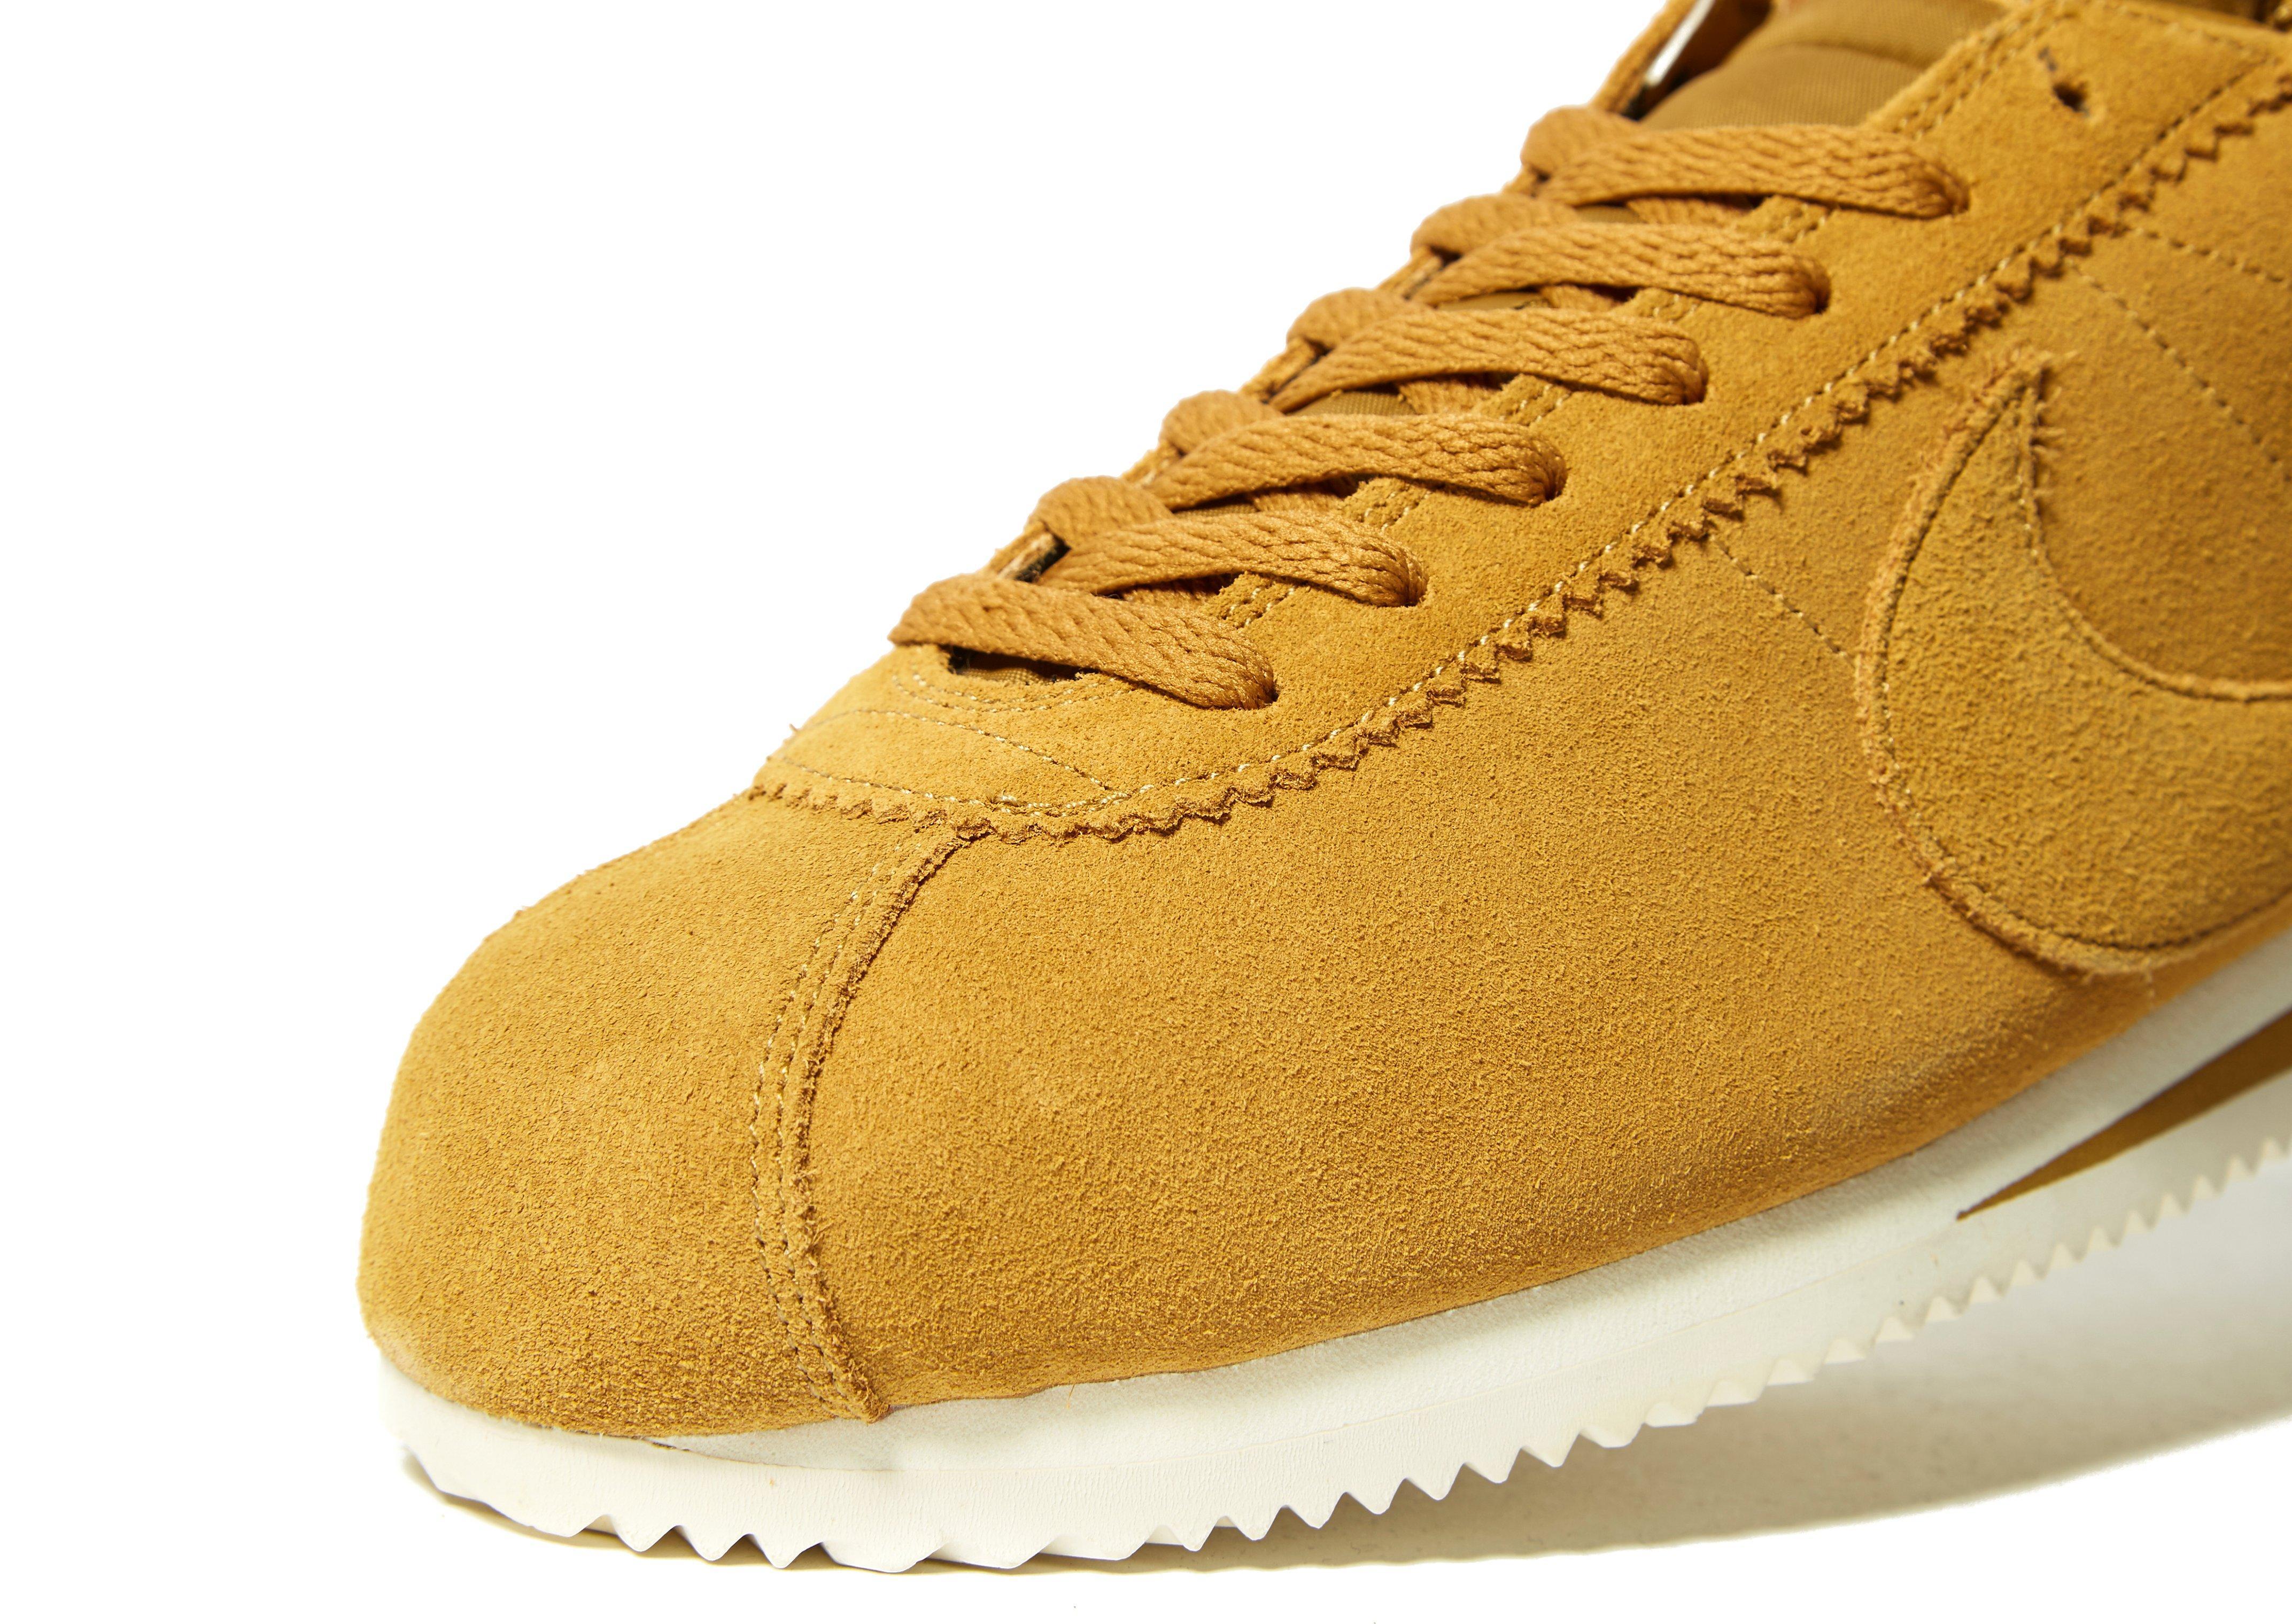 Nike Cortez Suede in Brown for Men - Lyst